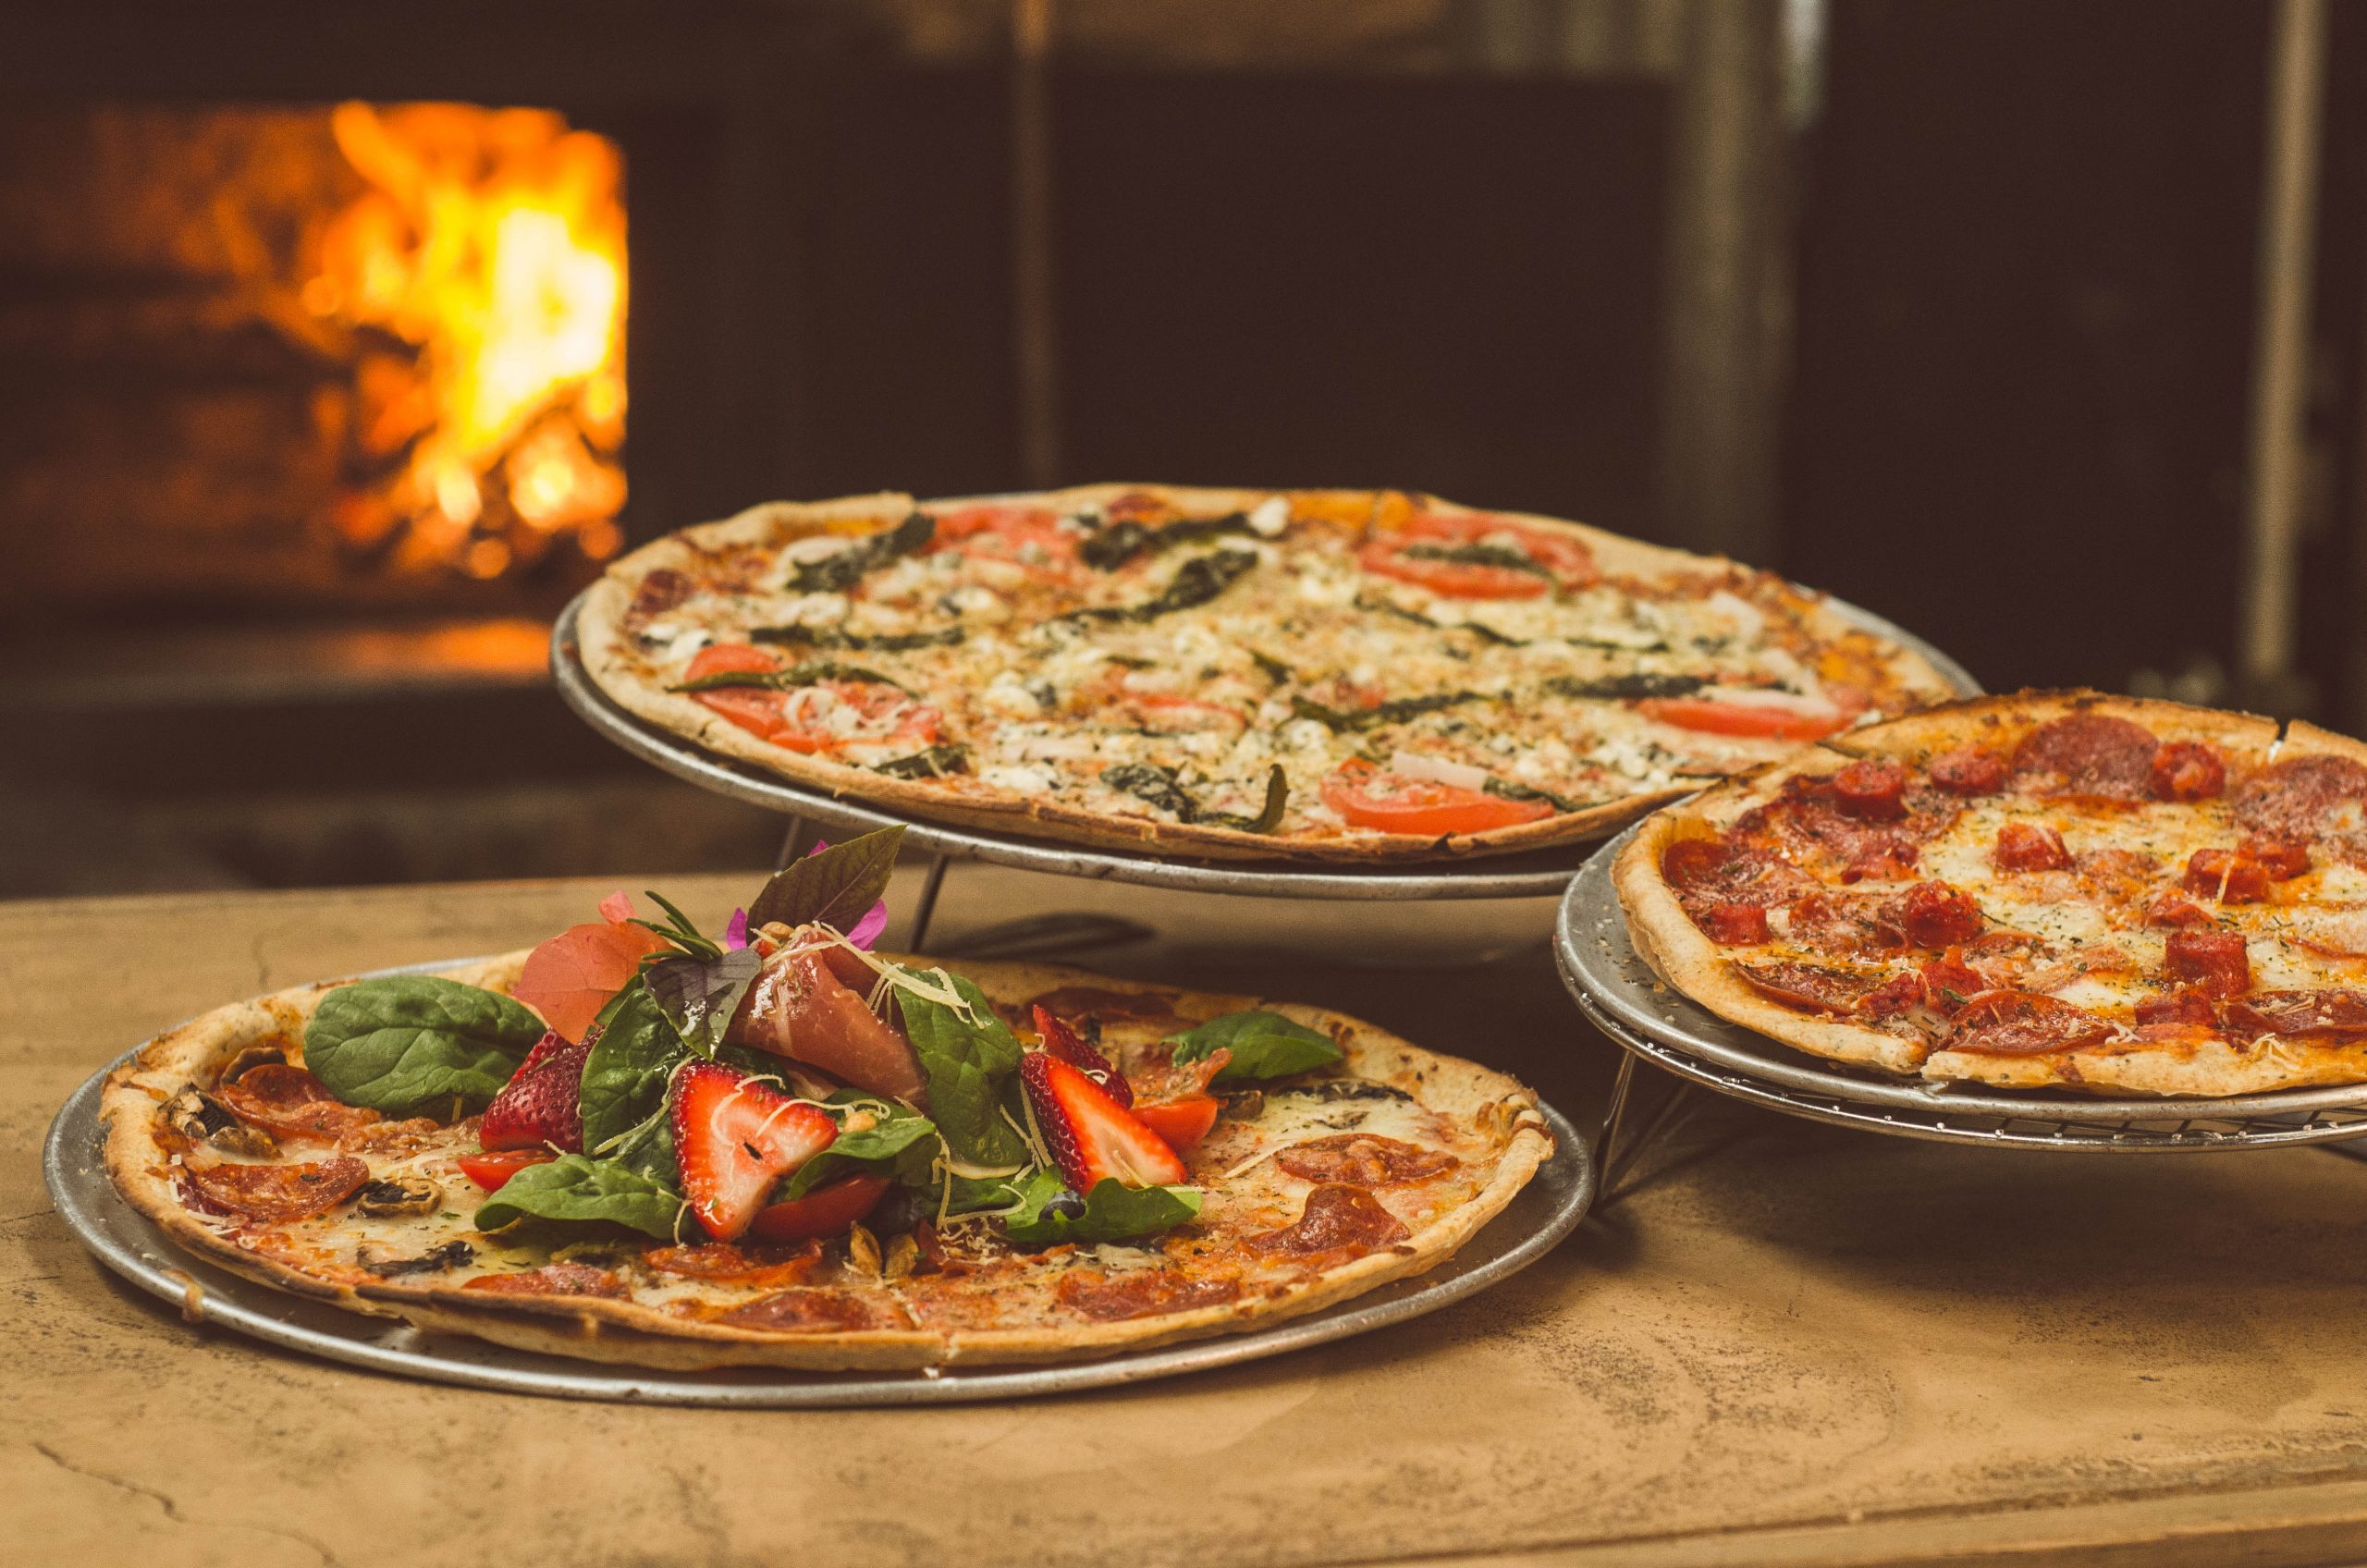 A delicious spread at Spacca Napoli Pizzeria, showcasing the renowned Neapolitan-style pizzas that mark Chicago's culinary excellence on the global map.